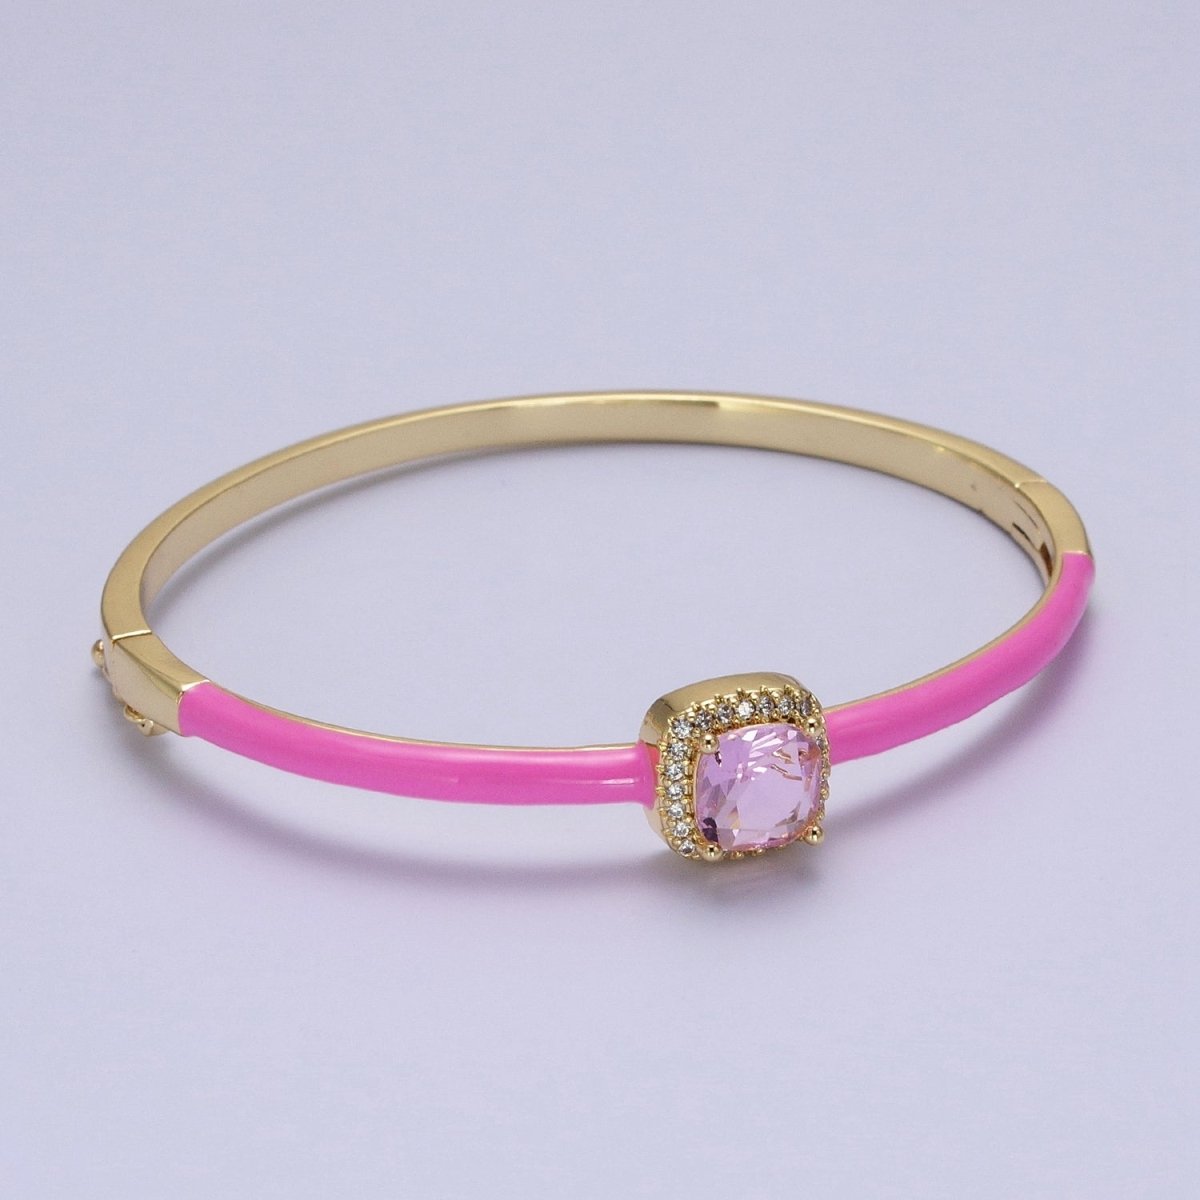 Barbie core Gold Filled Square White, Green, Pink Micro Paved Enamel Gold Bangle Bracelet | WA-1343 - WA-1345 Clearance Pricing - DLUXCA